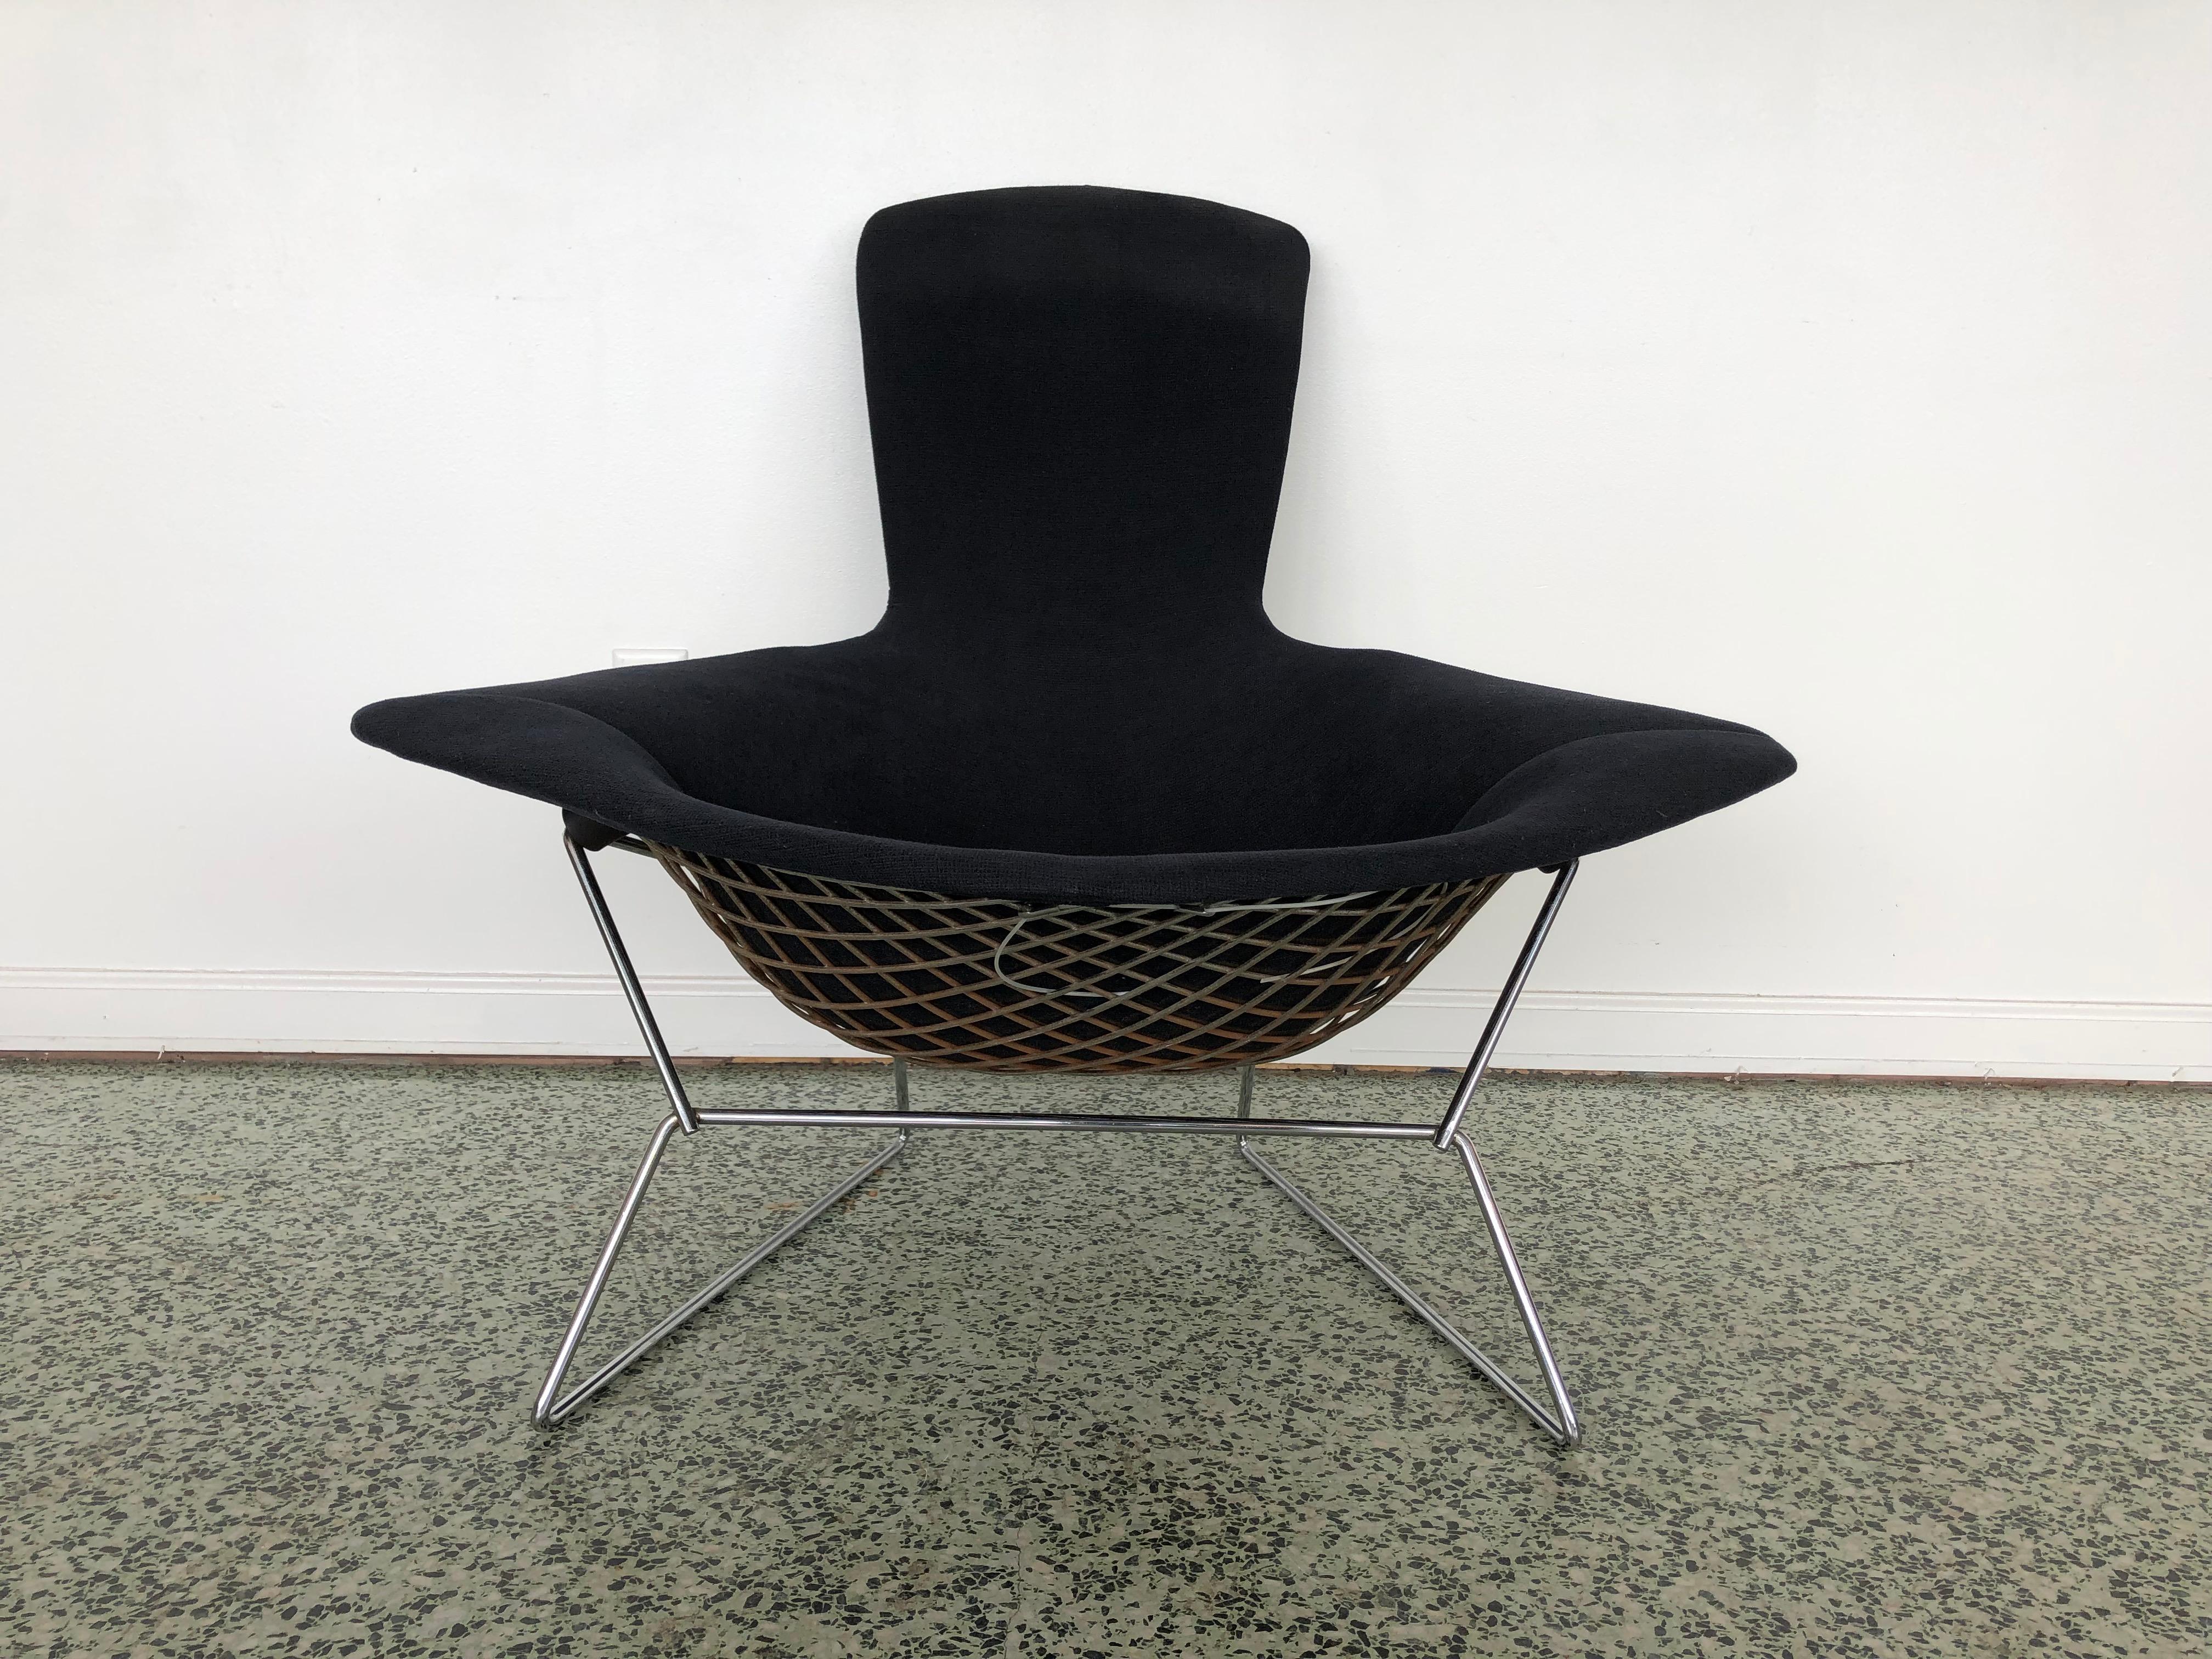 Designer: Harry Bertoia 
Manufacture: Knoll
Period/style: Mid-Century Modern 
Country: US 
Date: 1950s